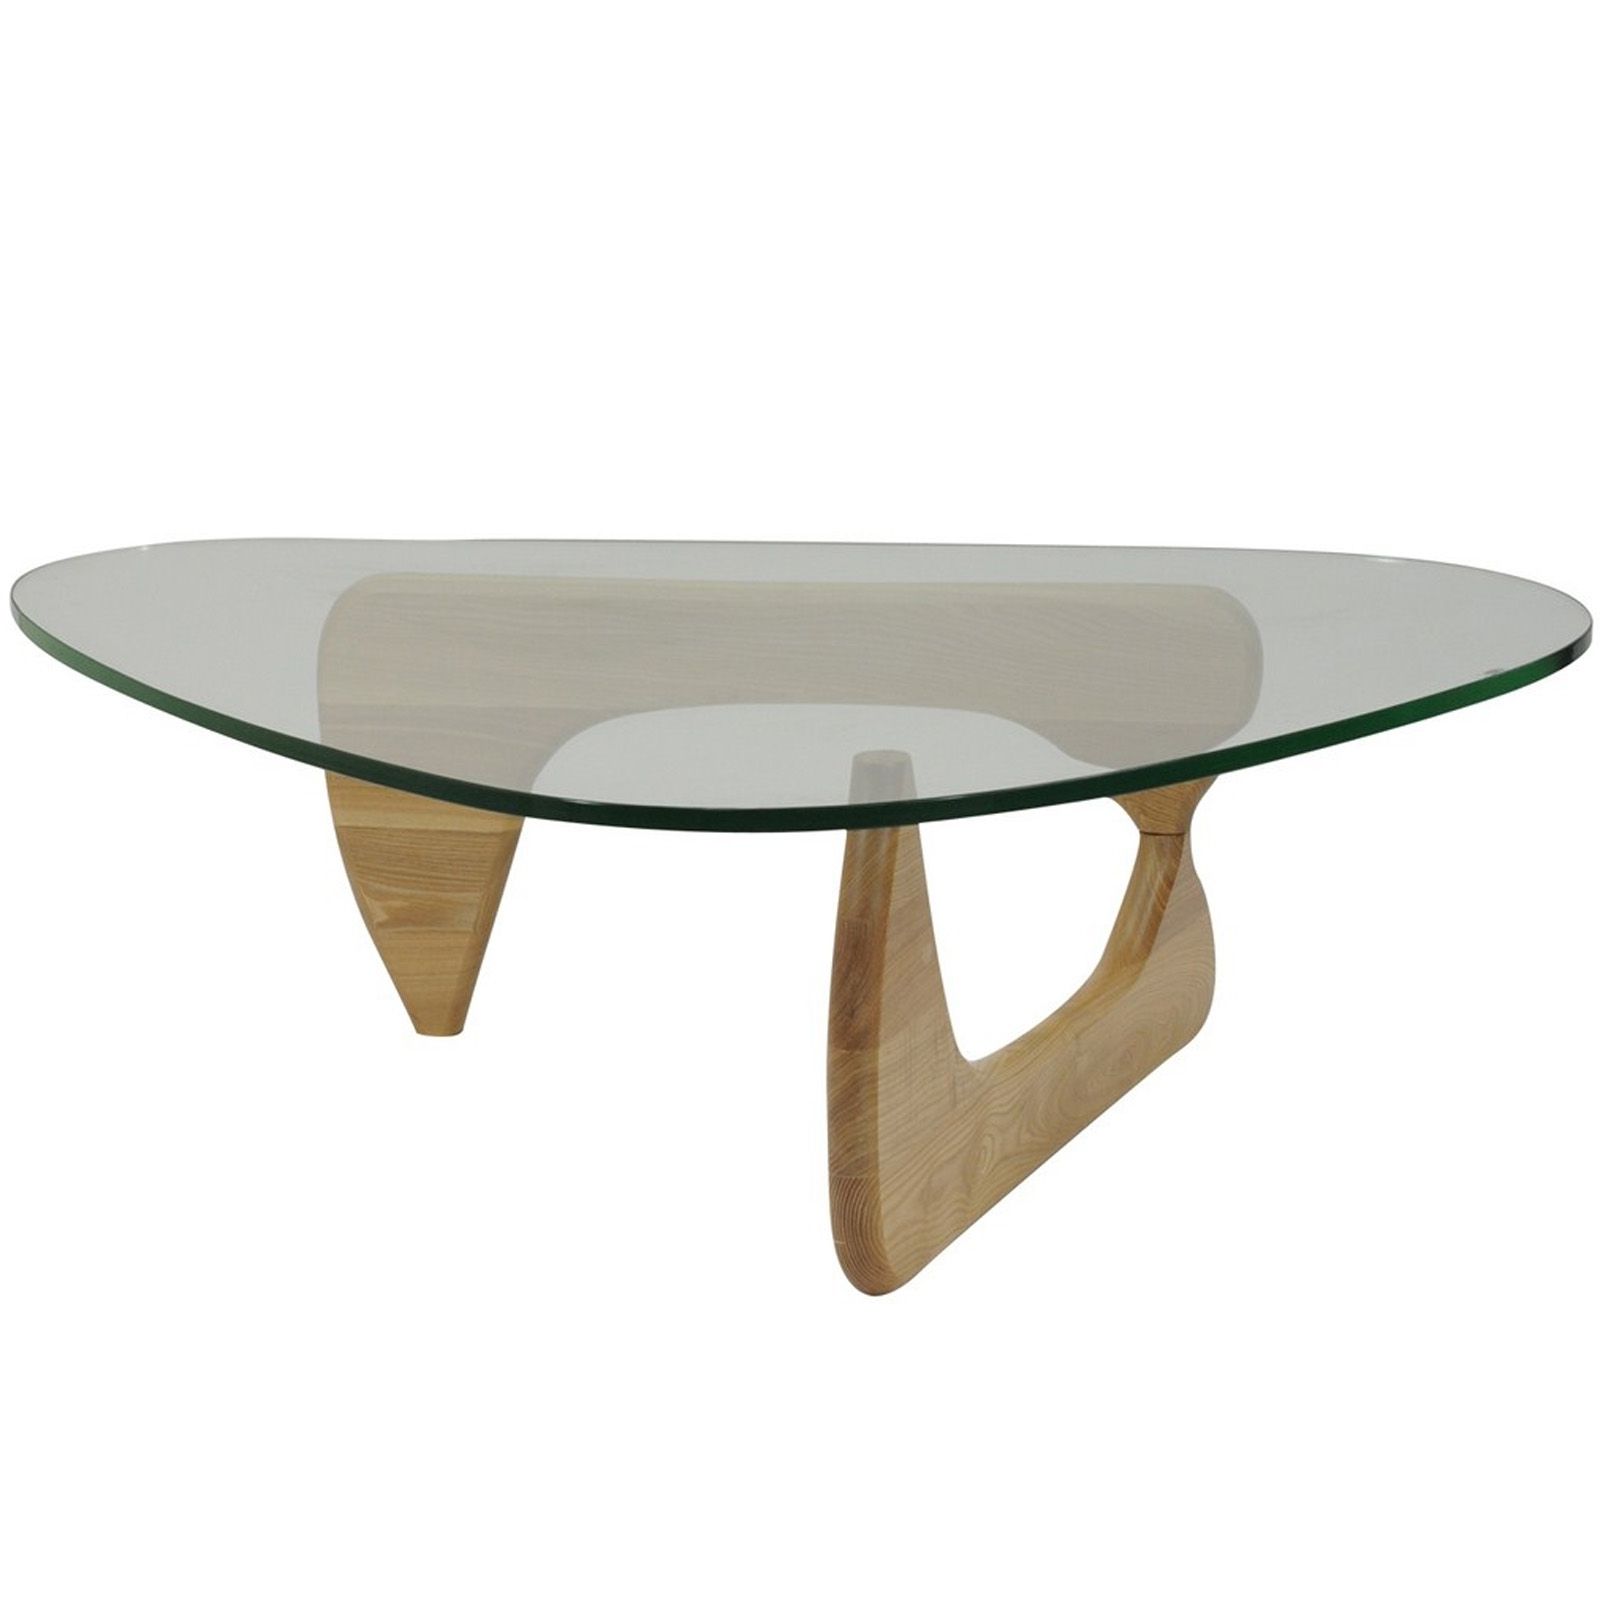 Most Current White Triangular Coffee Tables For Triangle Glass Top Coffee Table, Plans For Diy Cabinets Uk (Gallery 2 of 20)